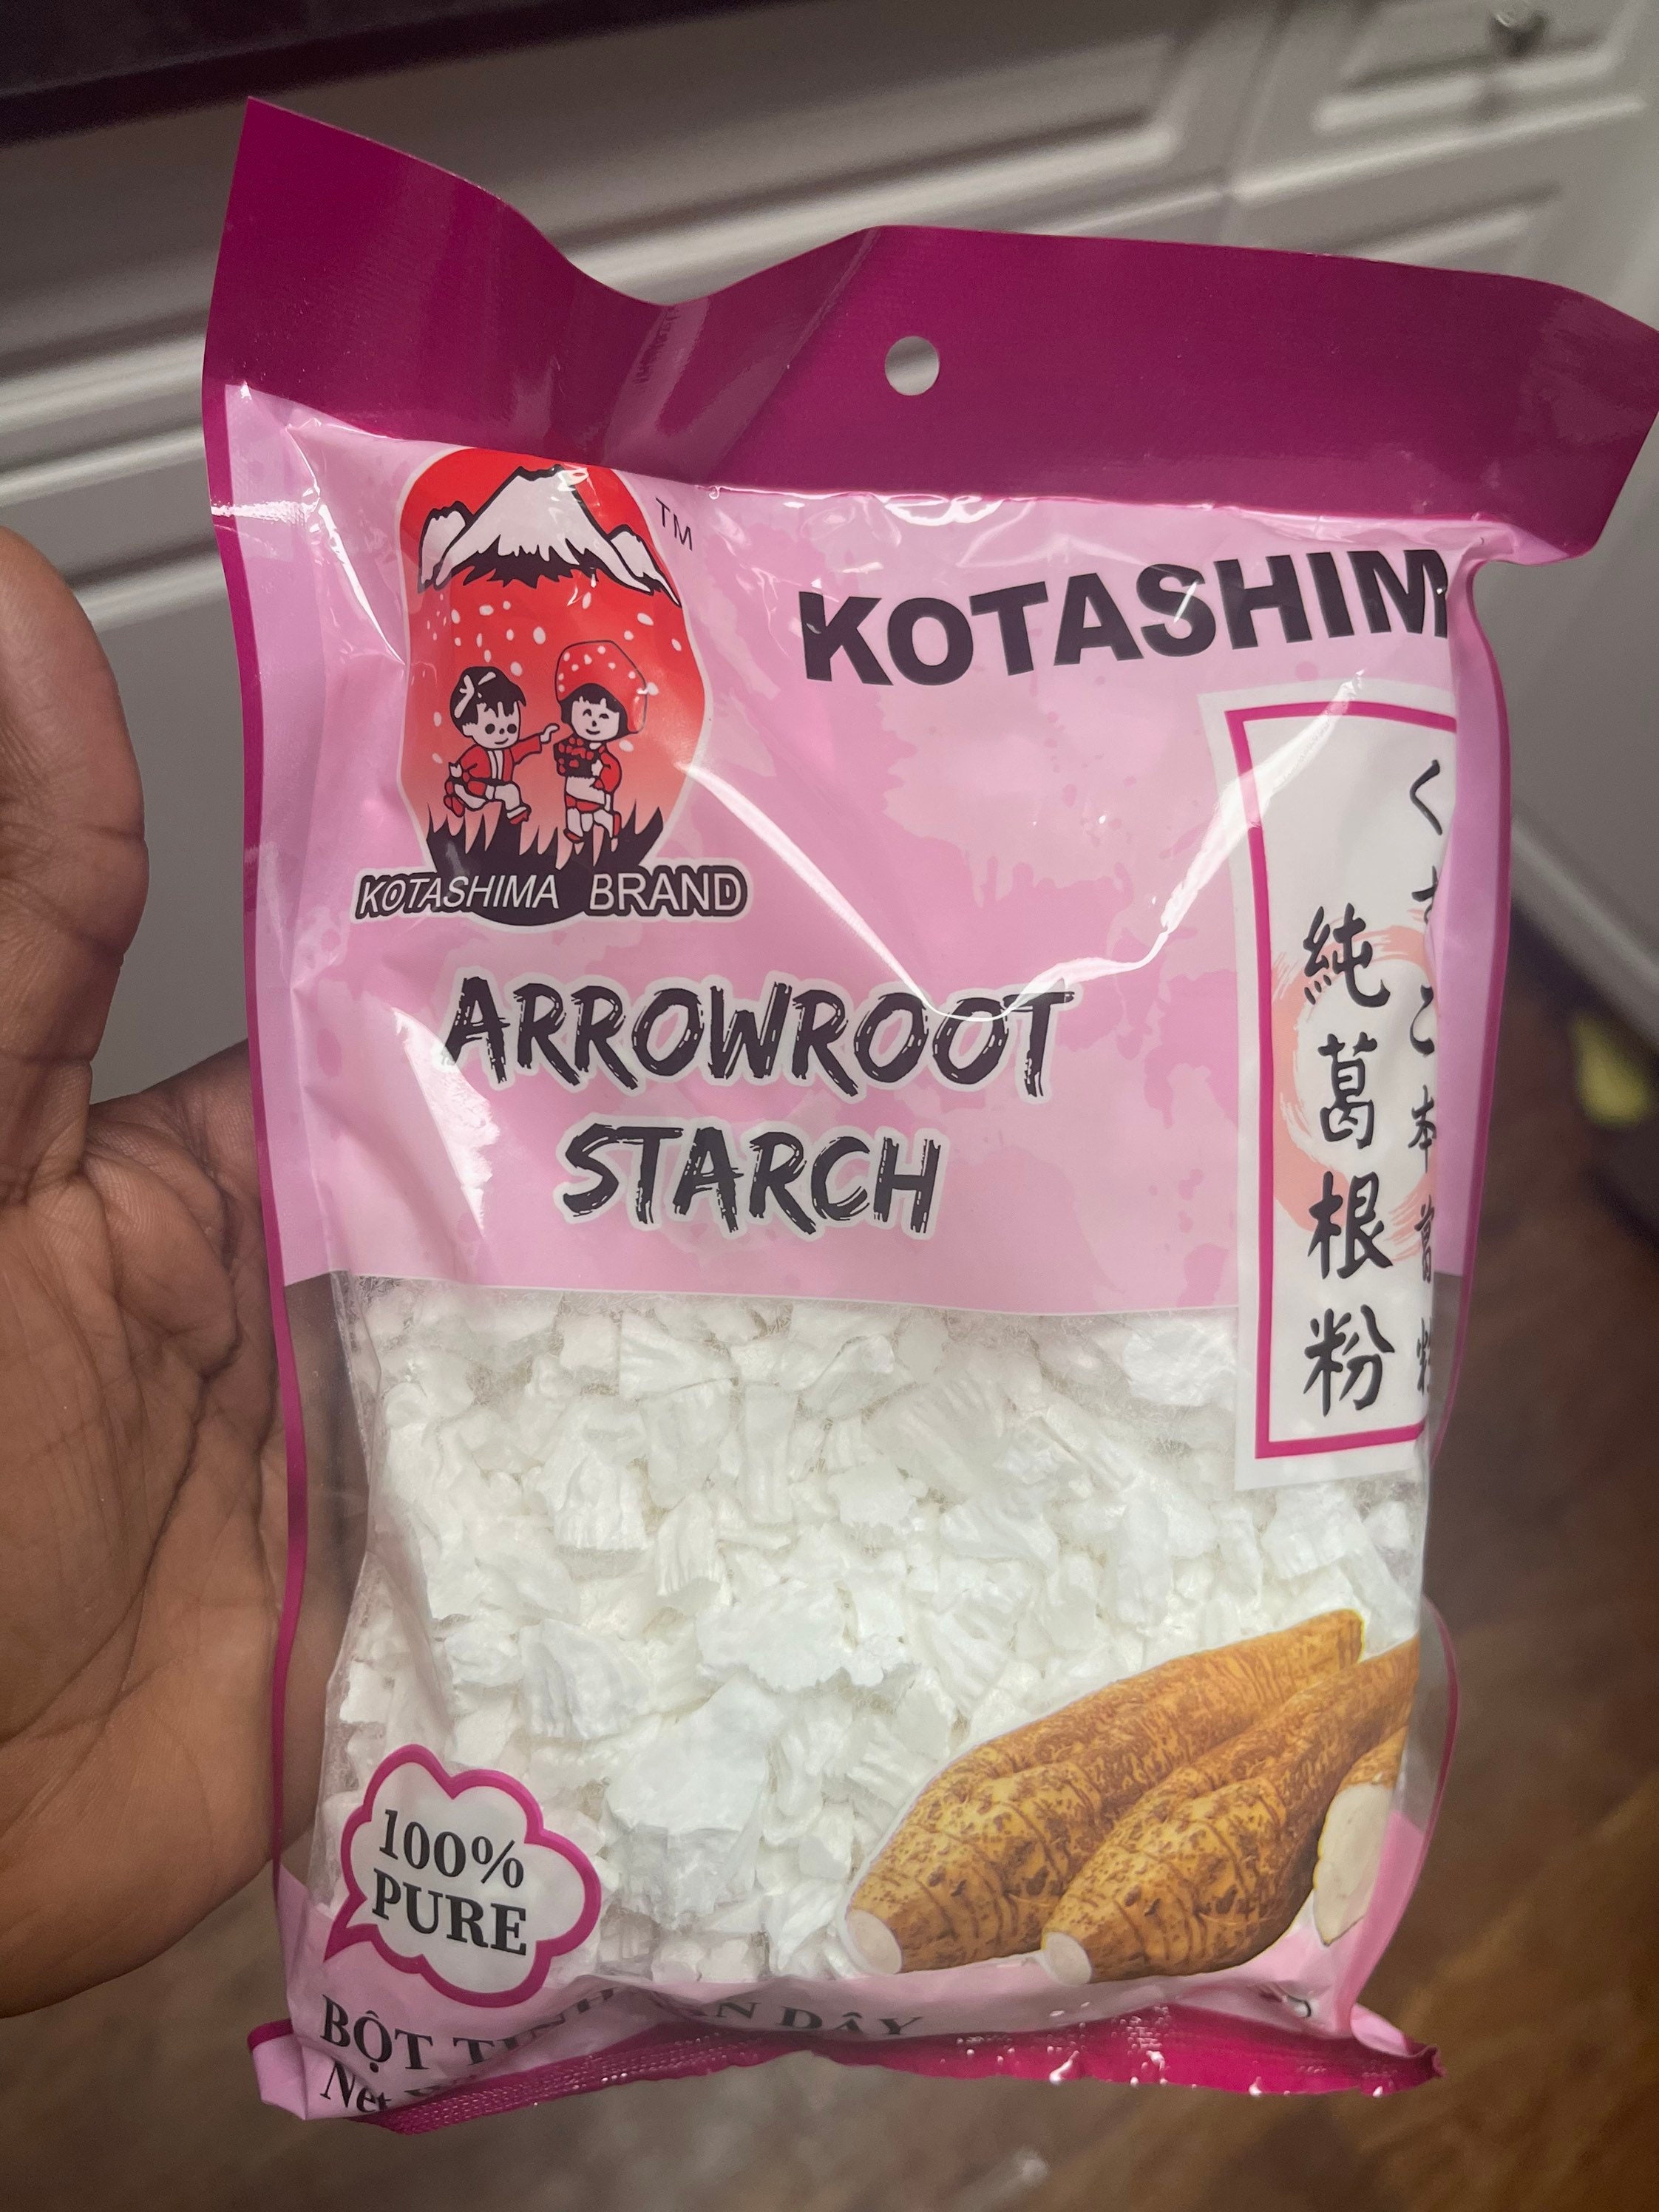 Coconut Tree Arrowroot Starch (Bot San Day) – Thestarchfactory